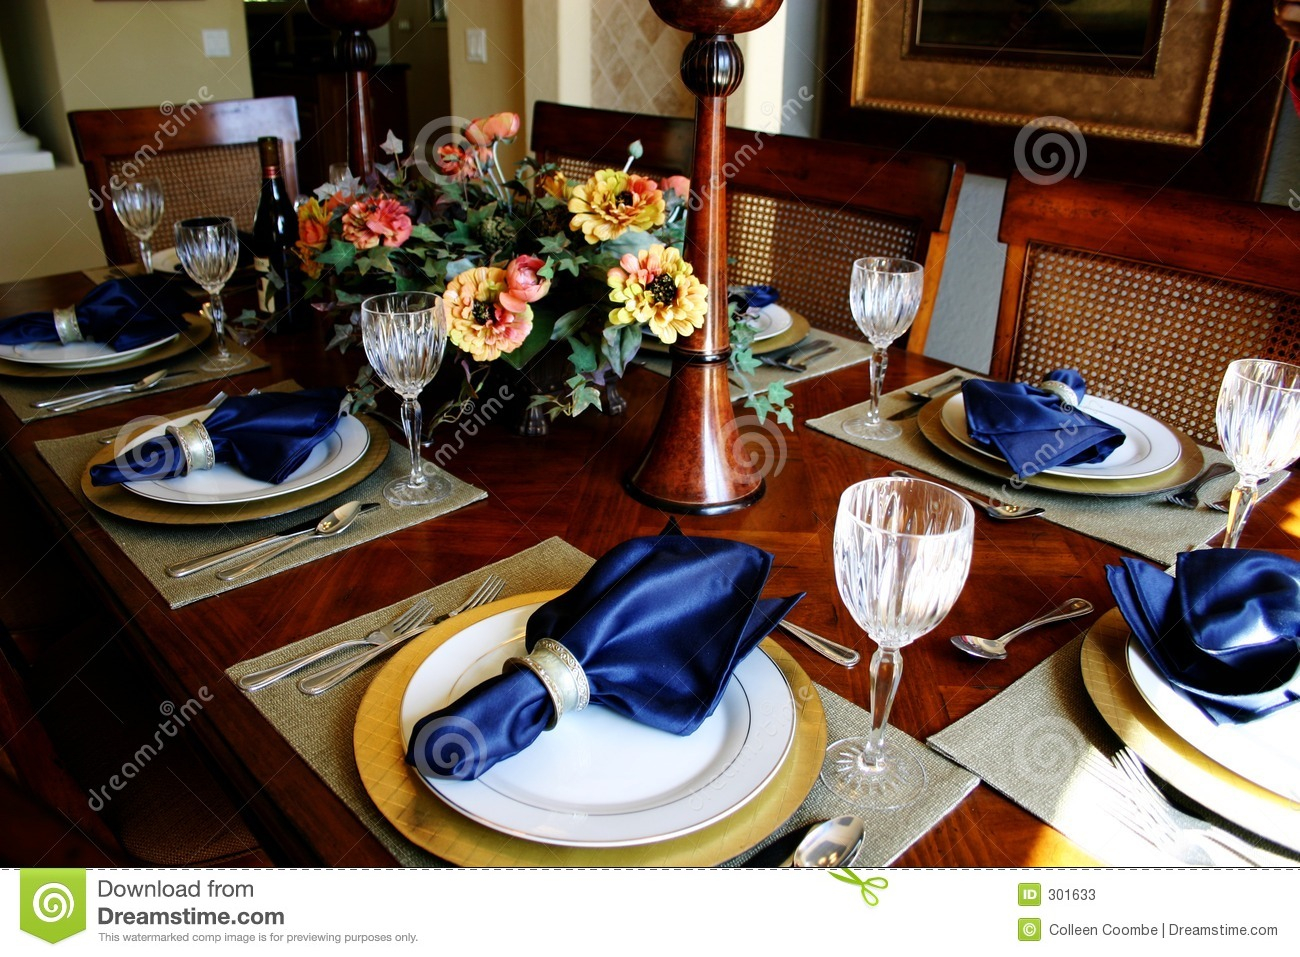 Dressed Dining Room Table Stock Image Image Of Glasses 301633 in sizing 1300 X 957